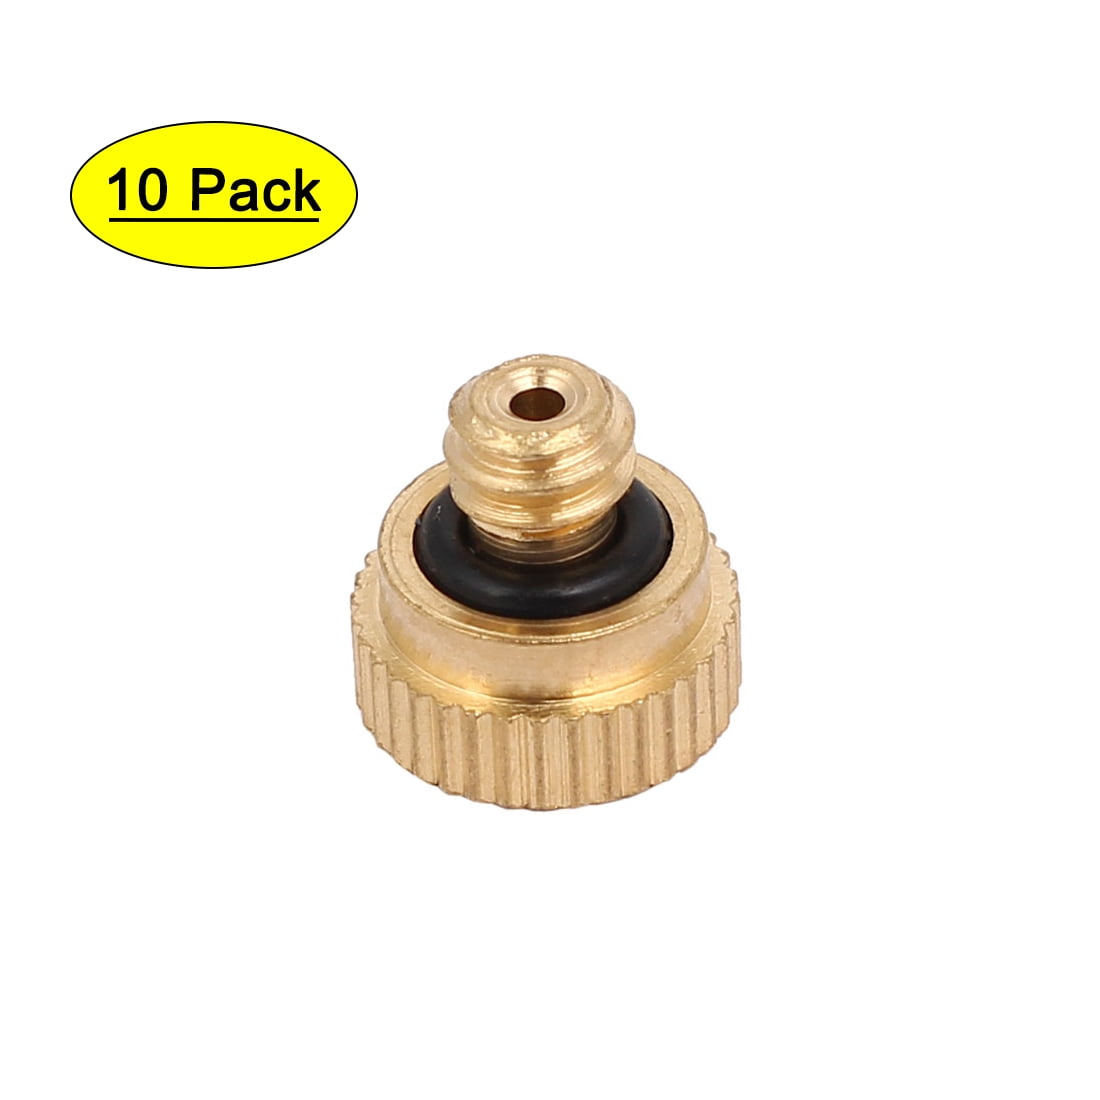 10x Low-pressure Atomizing Misting Nozzle Spray Injector Atomizing Nozzle 0.2mm